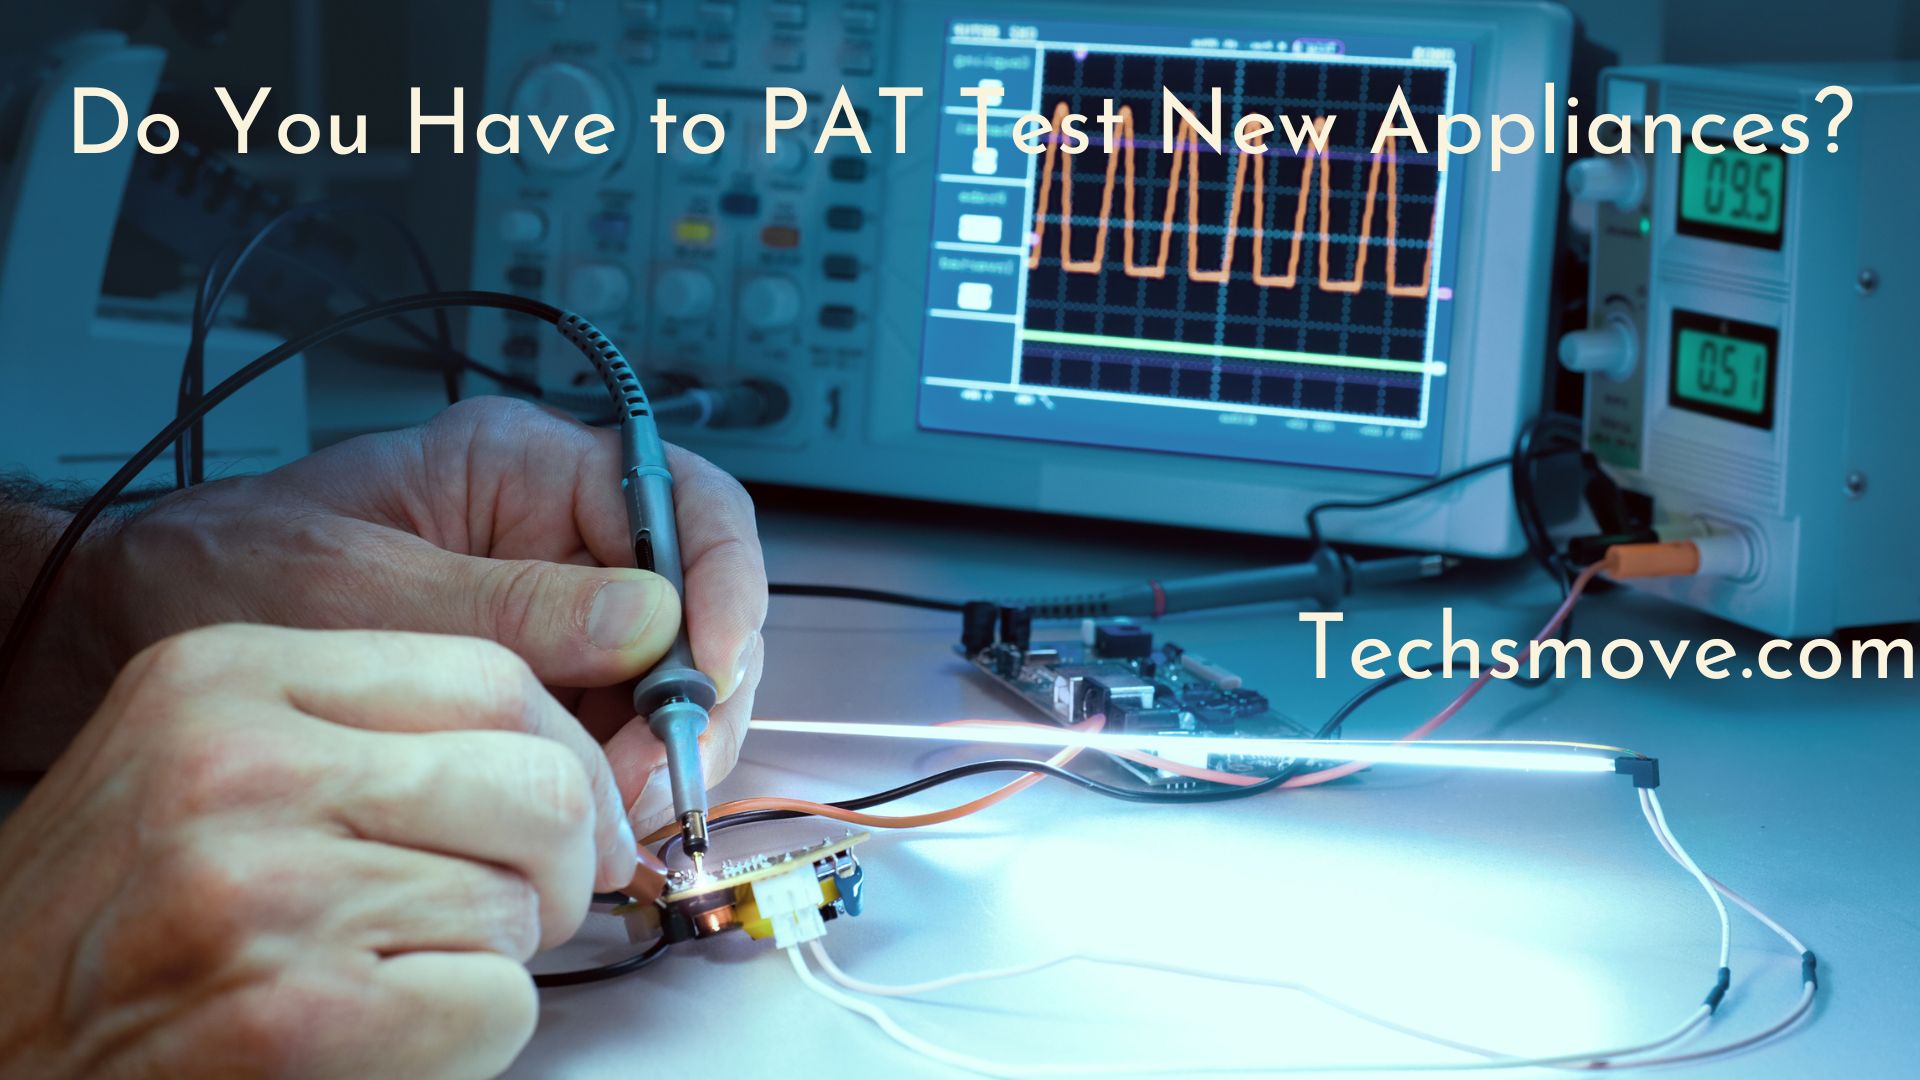 Do You Have to PAT Test New Appliances?